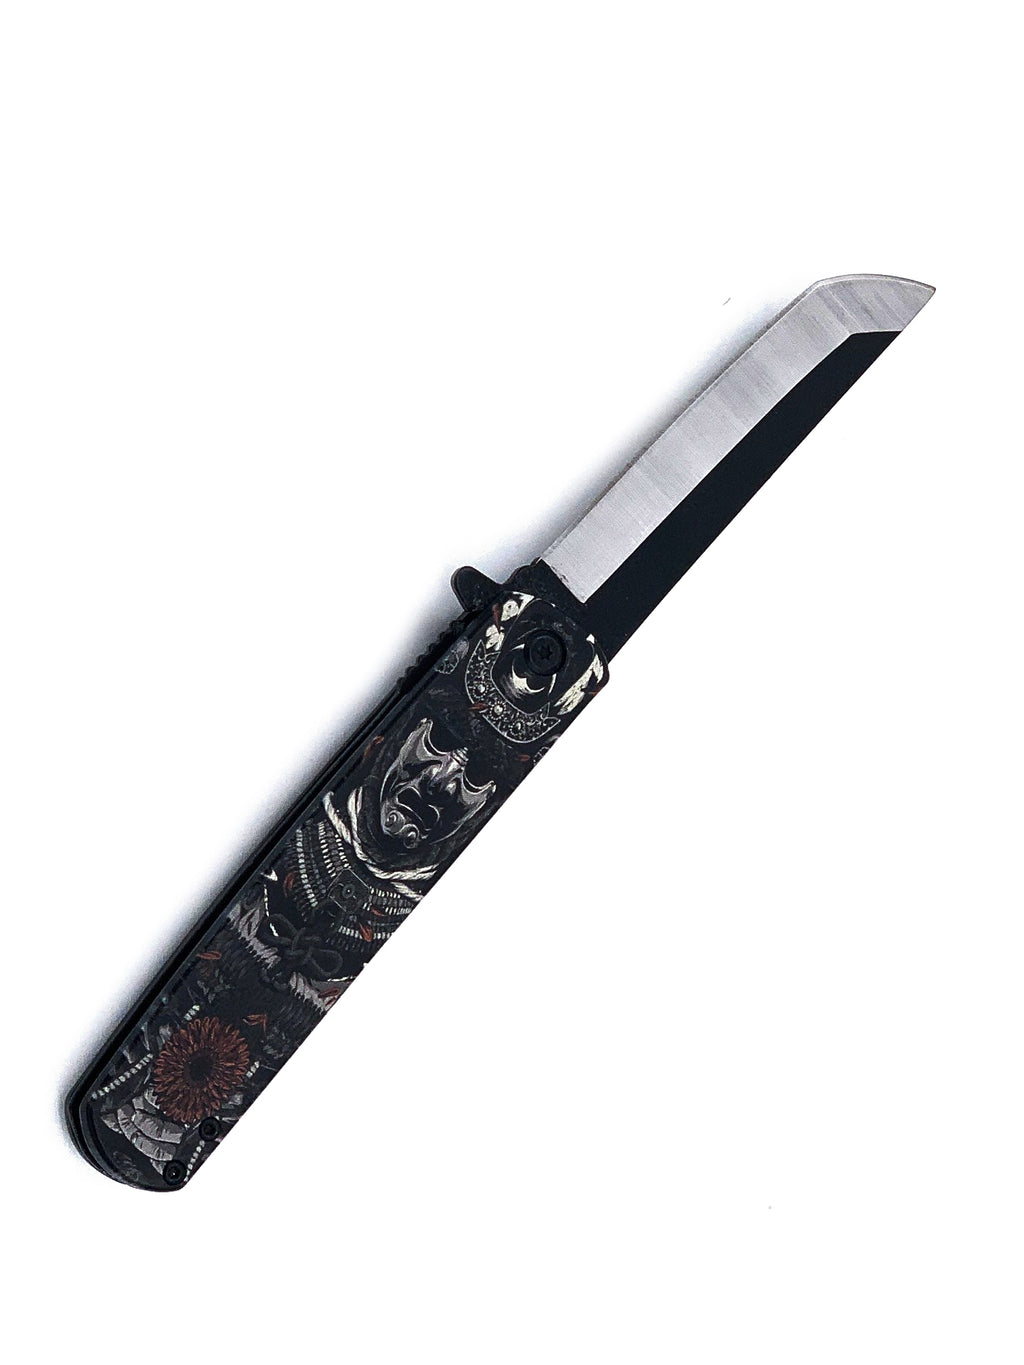 The Masked Warrior Samurai Spring Assisted Pocket Knife with Two Tone Rounded Tanto Blade